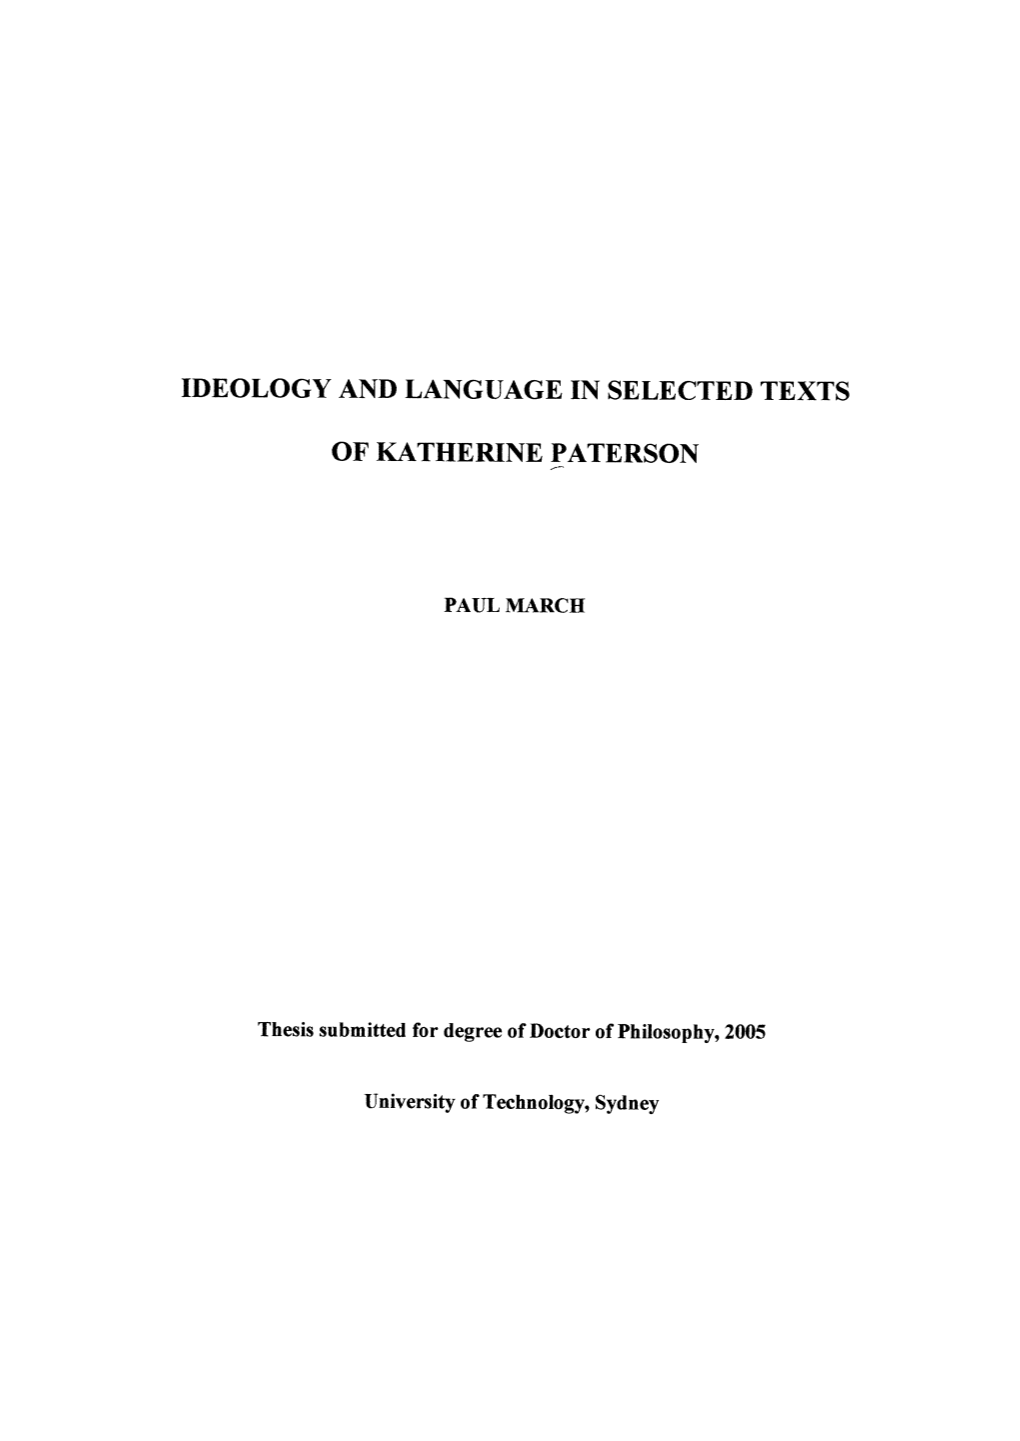 Ideology and Language in Selected Texts of Katherine Paterson